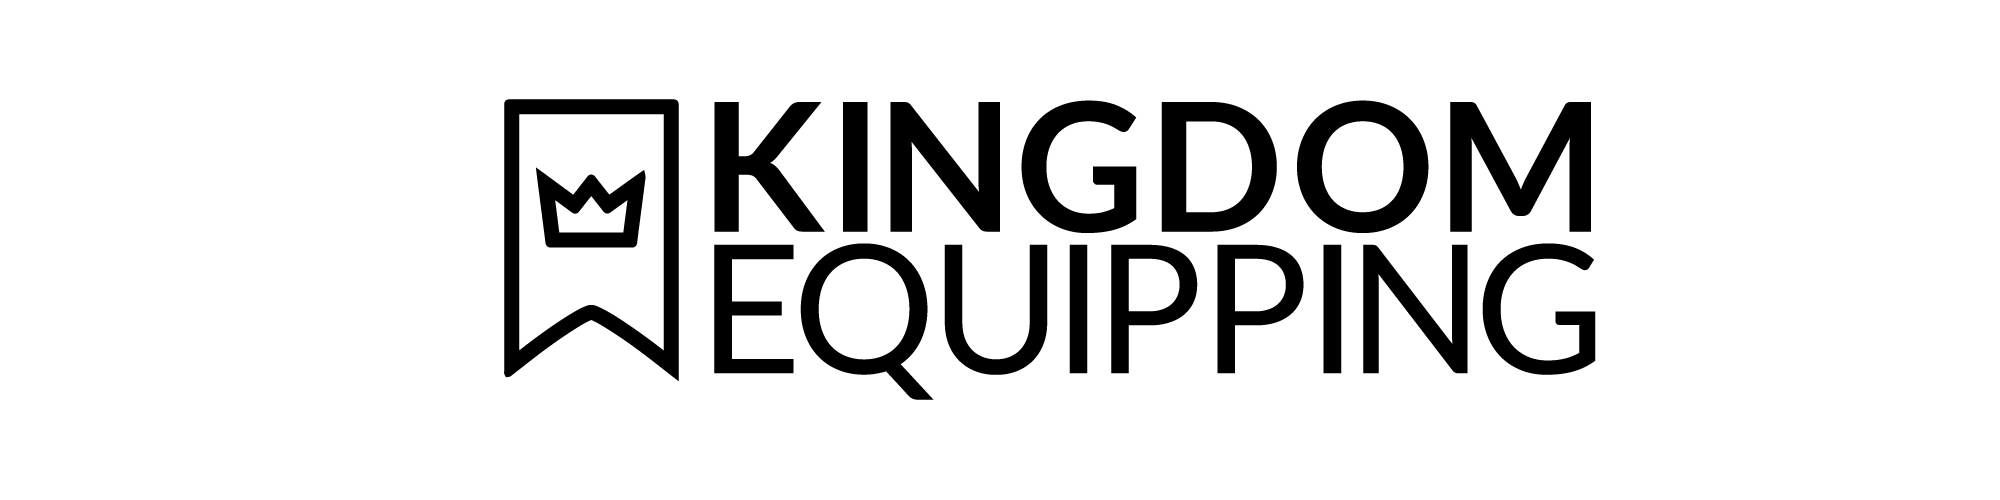 Clay Harrington Session 8 Highlight | Kingdom Equipping